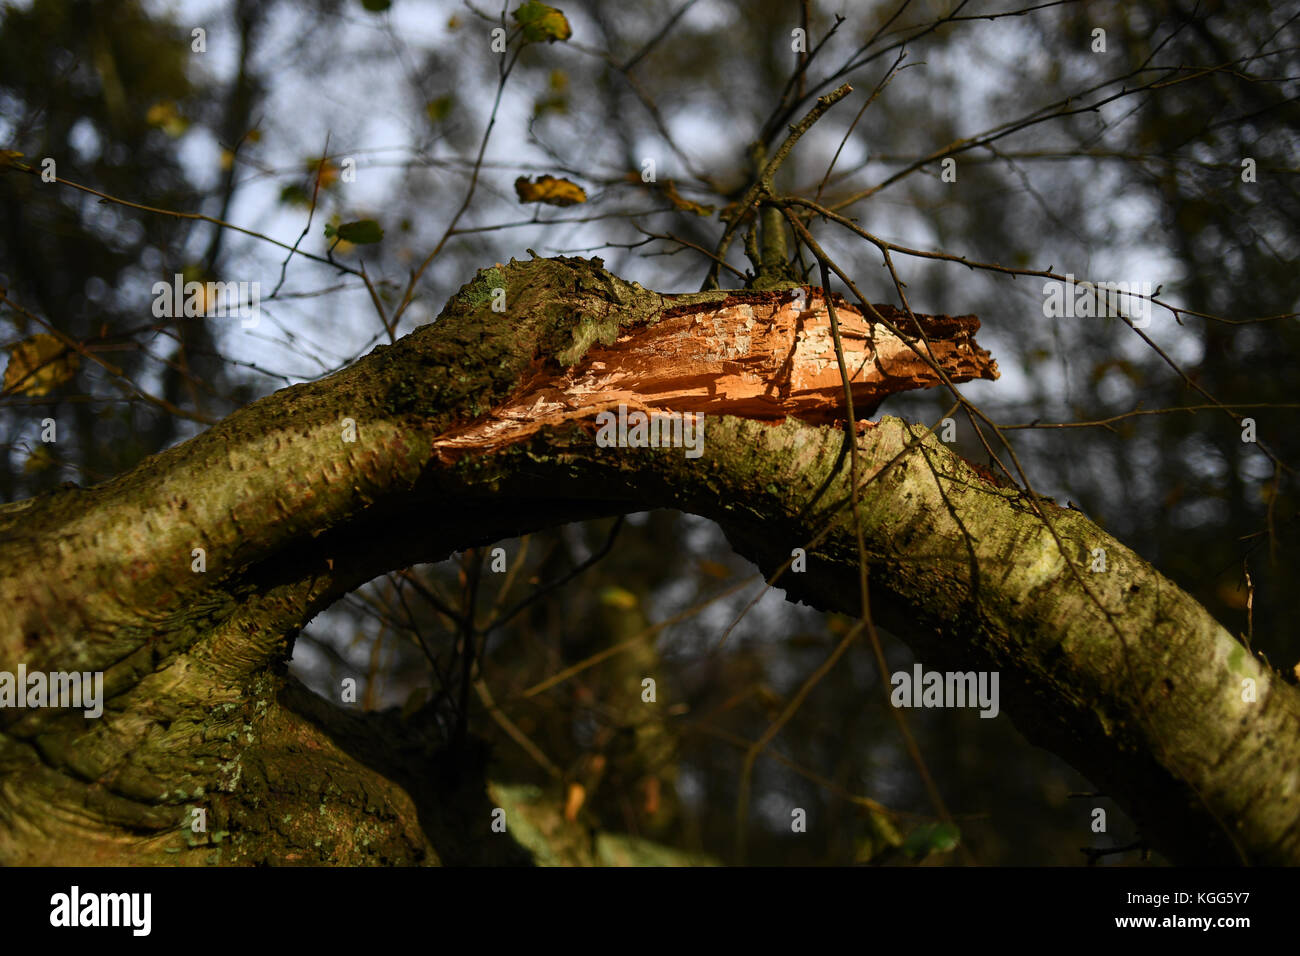 A broken large tree branch snapped open showing inside of bark Stock Photo